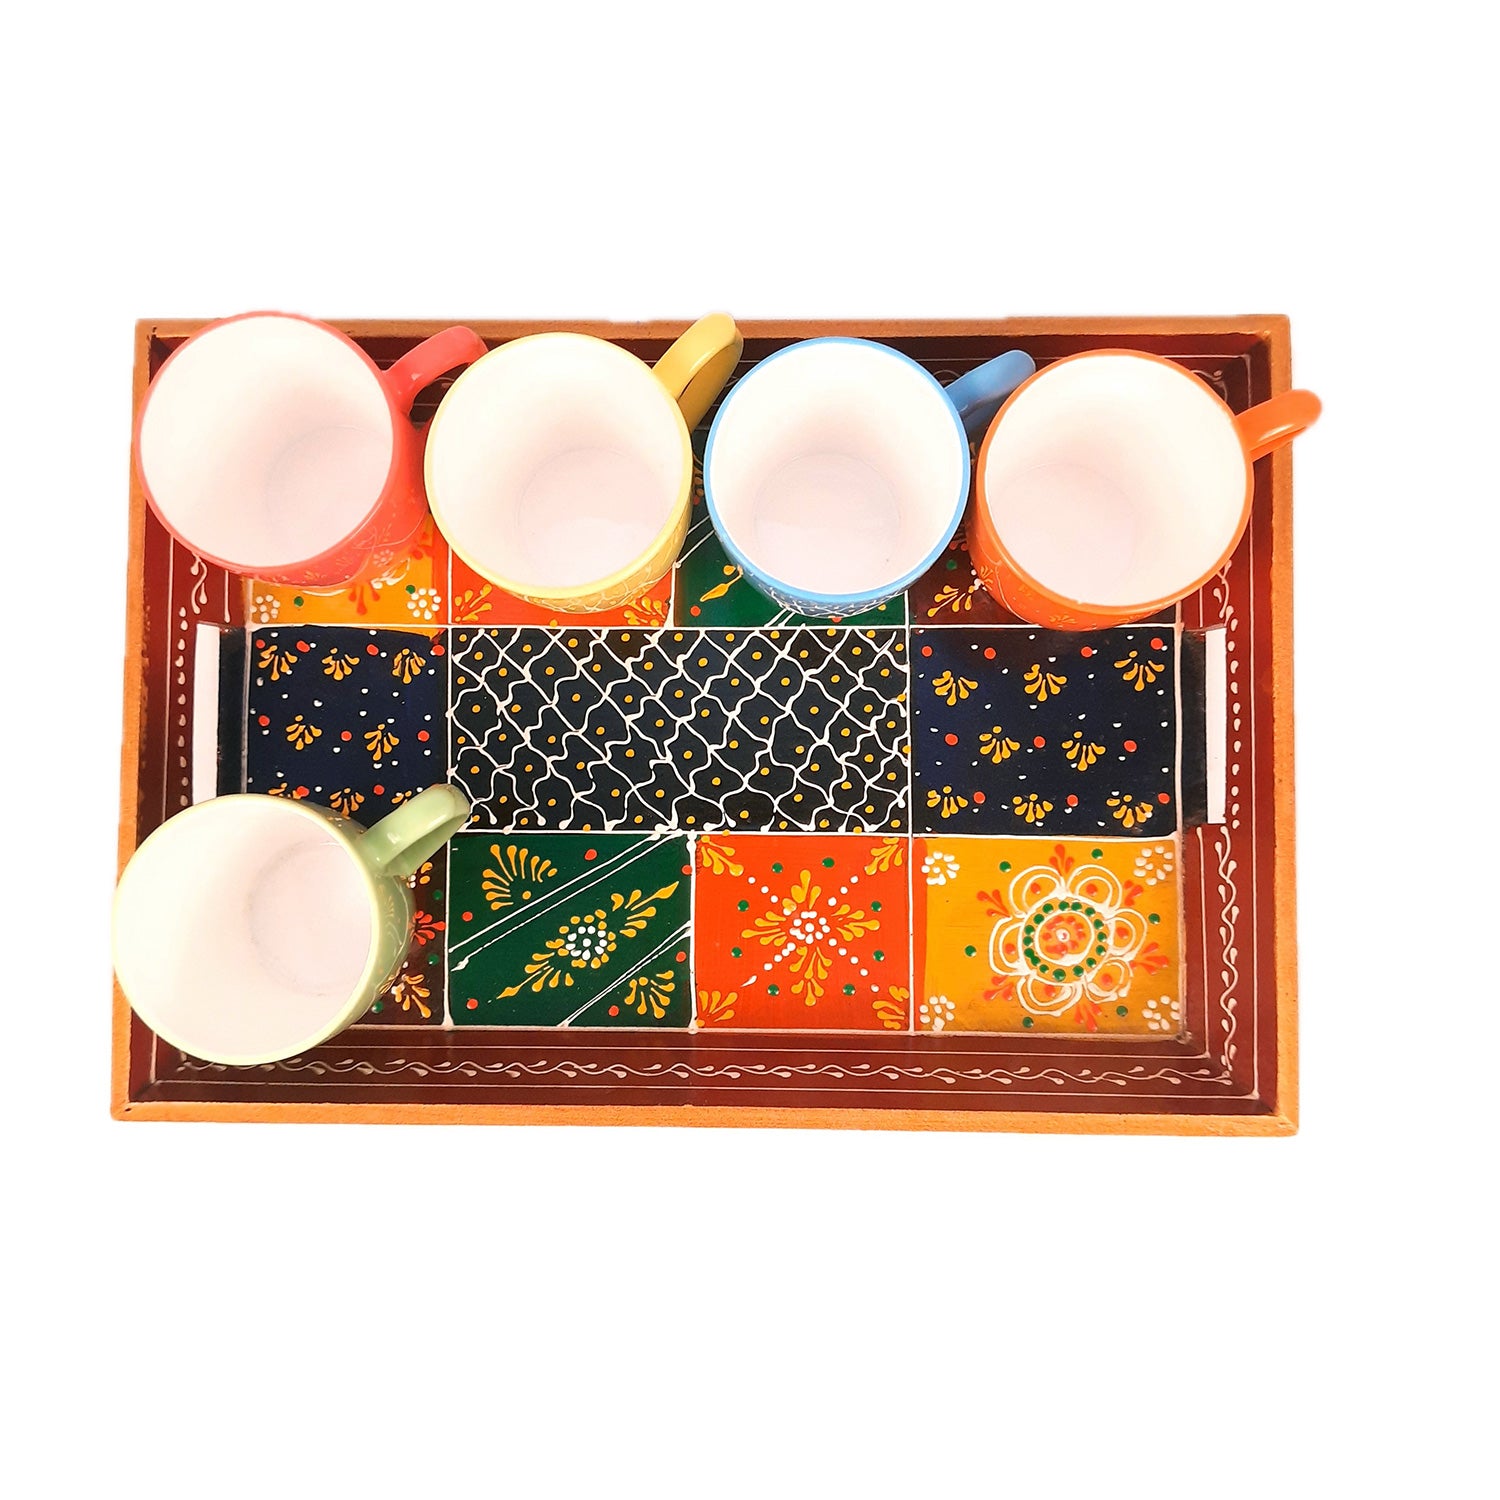 Wooden Tray Set | Serving Trays & Platters for Tea, Coffee & Snacks | Multipurpose Decorative Trays - for Home, Dining Table Organization, Kitchen & Gifts (Pack of 3) - Apkamart